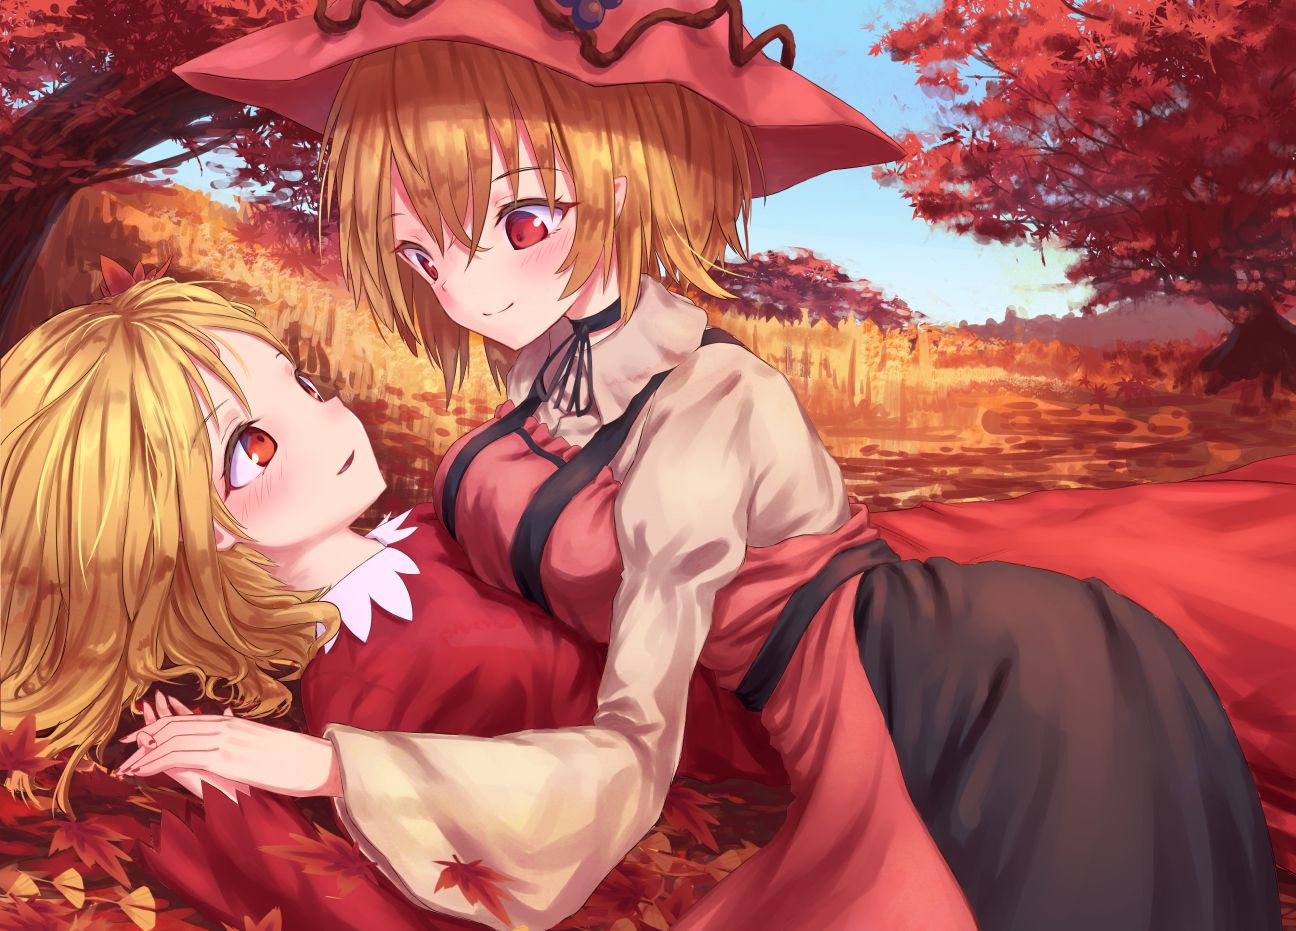 [secondary/ZIP] lovely yuri Lesbian image of a cute girl each other 4